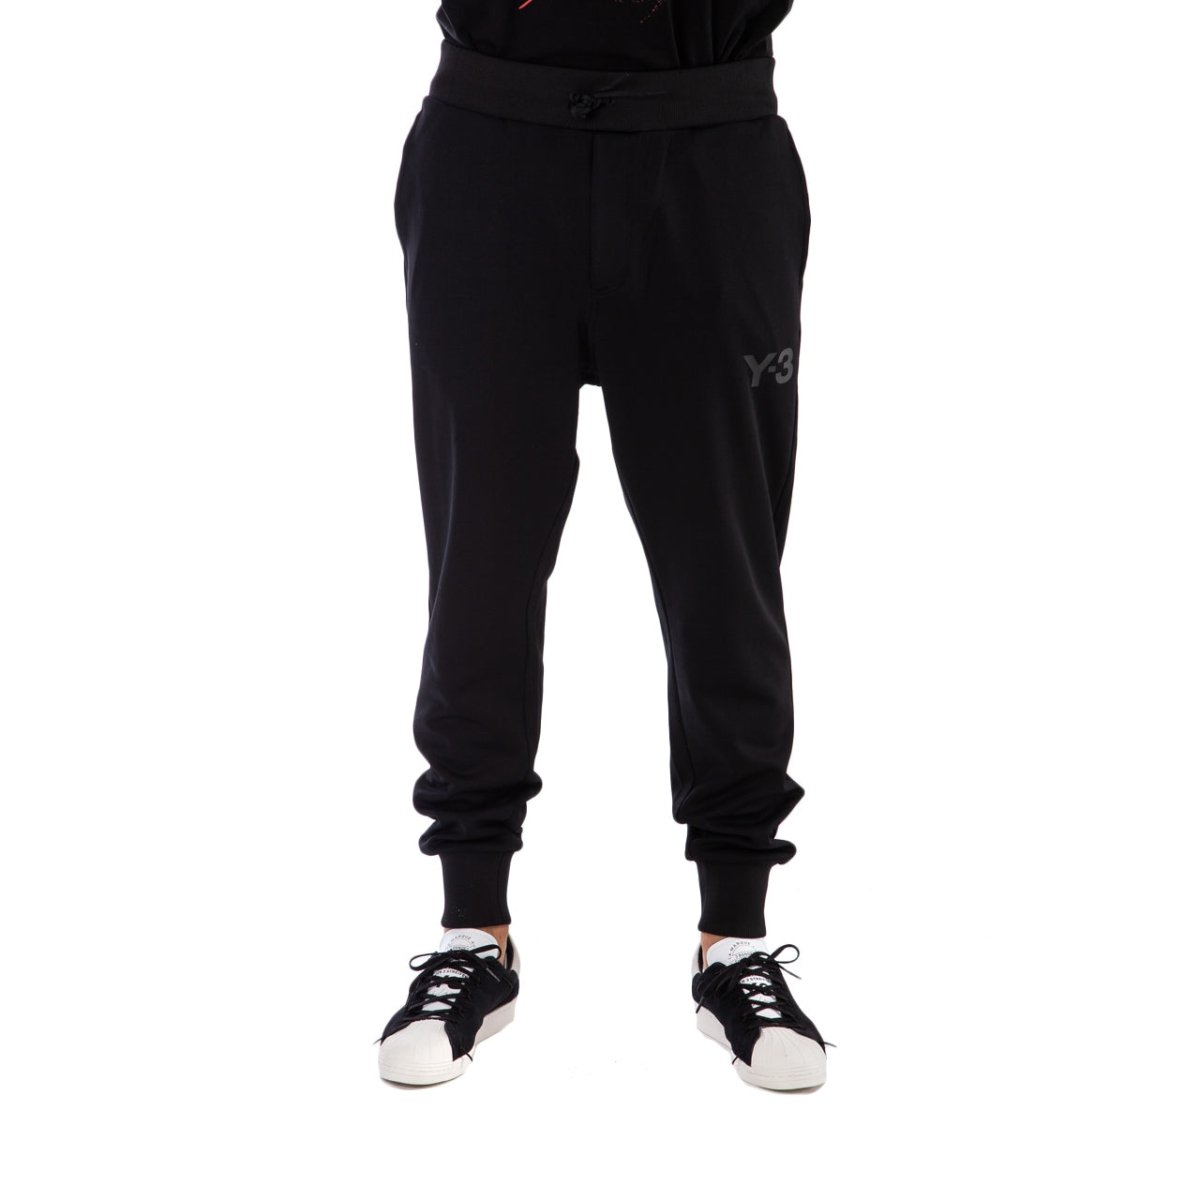 Y-3 Classic Track Pant (Schwarz)  - Allike Store